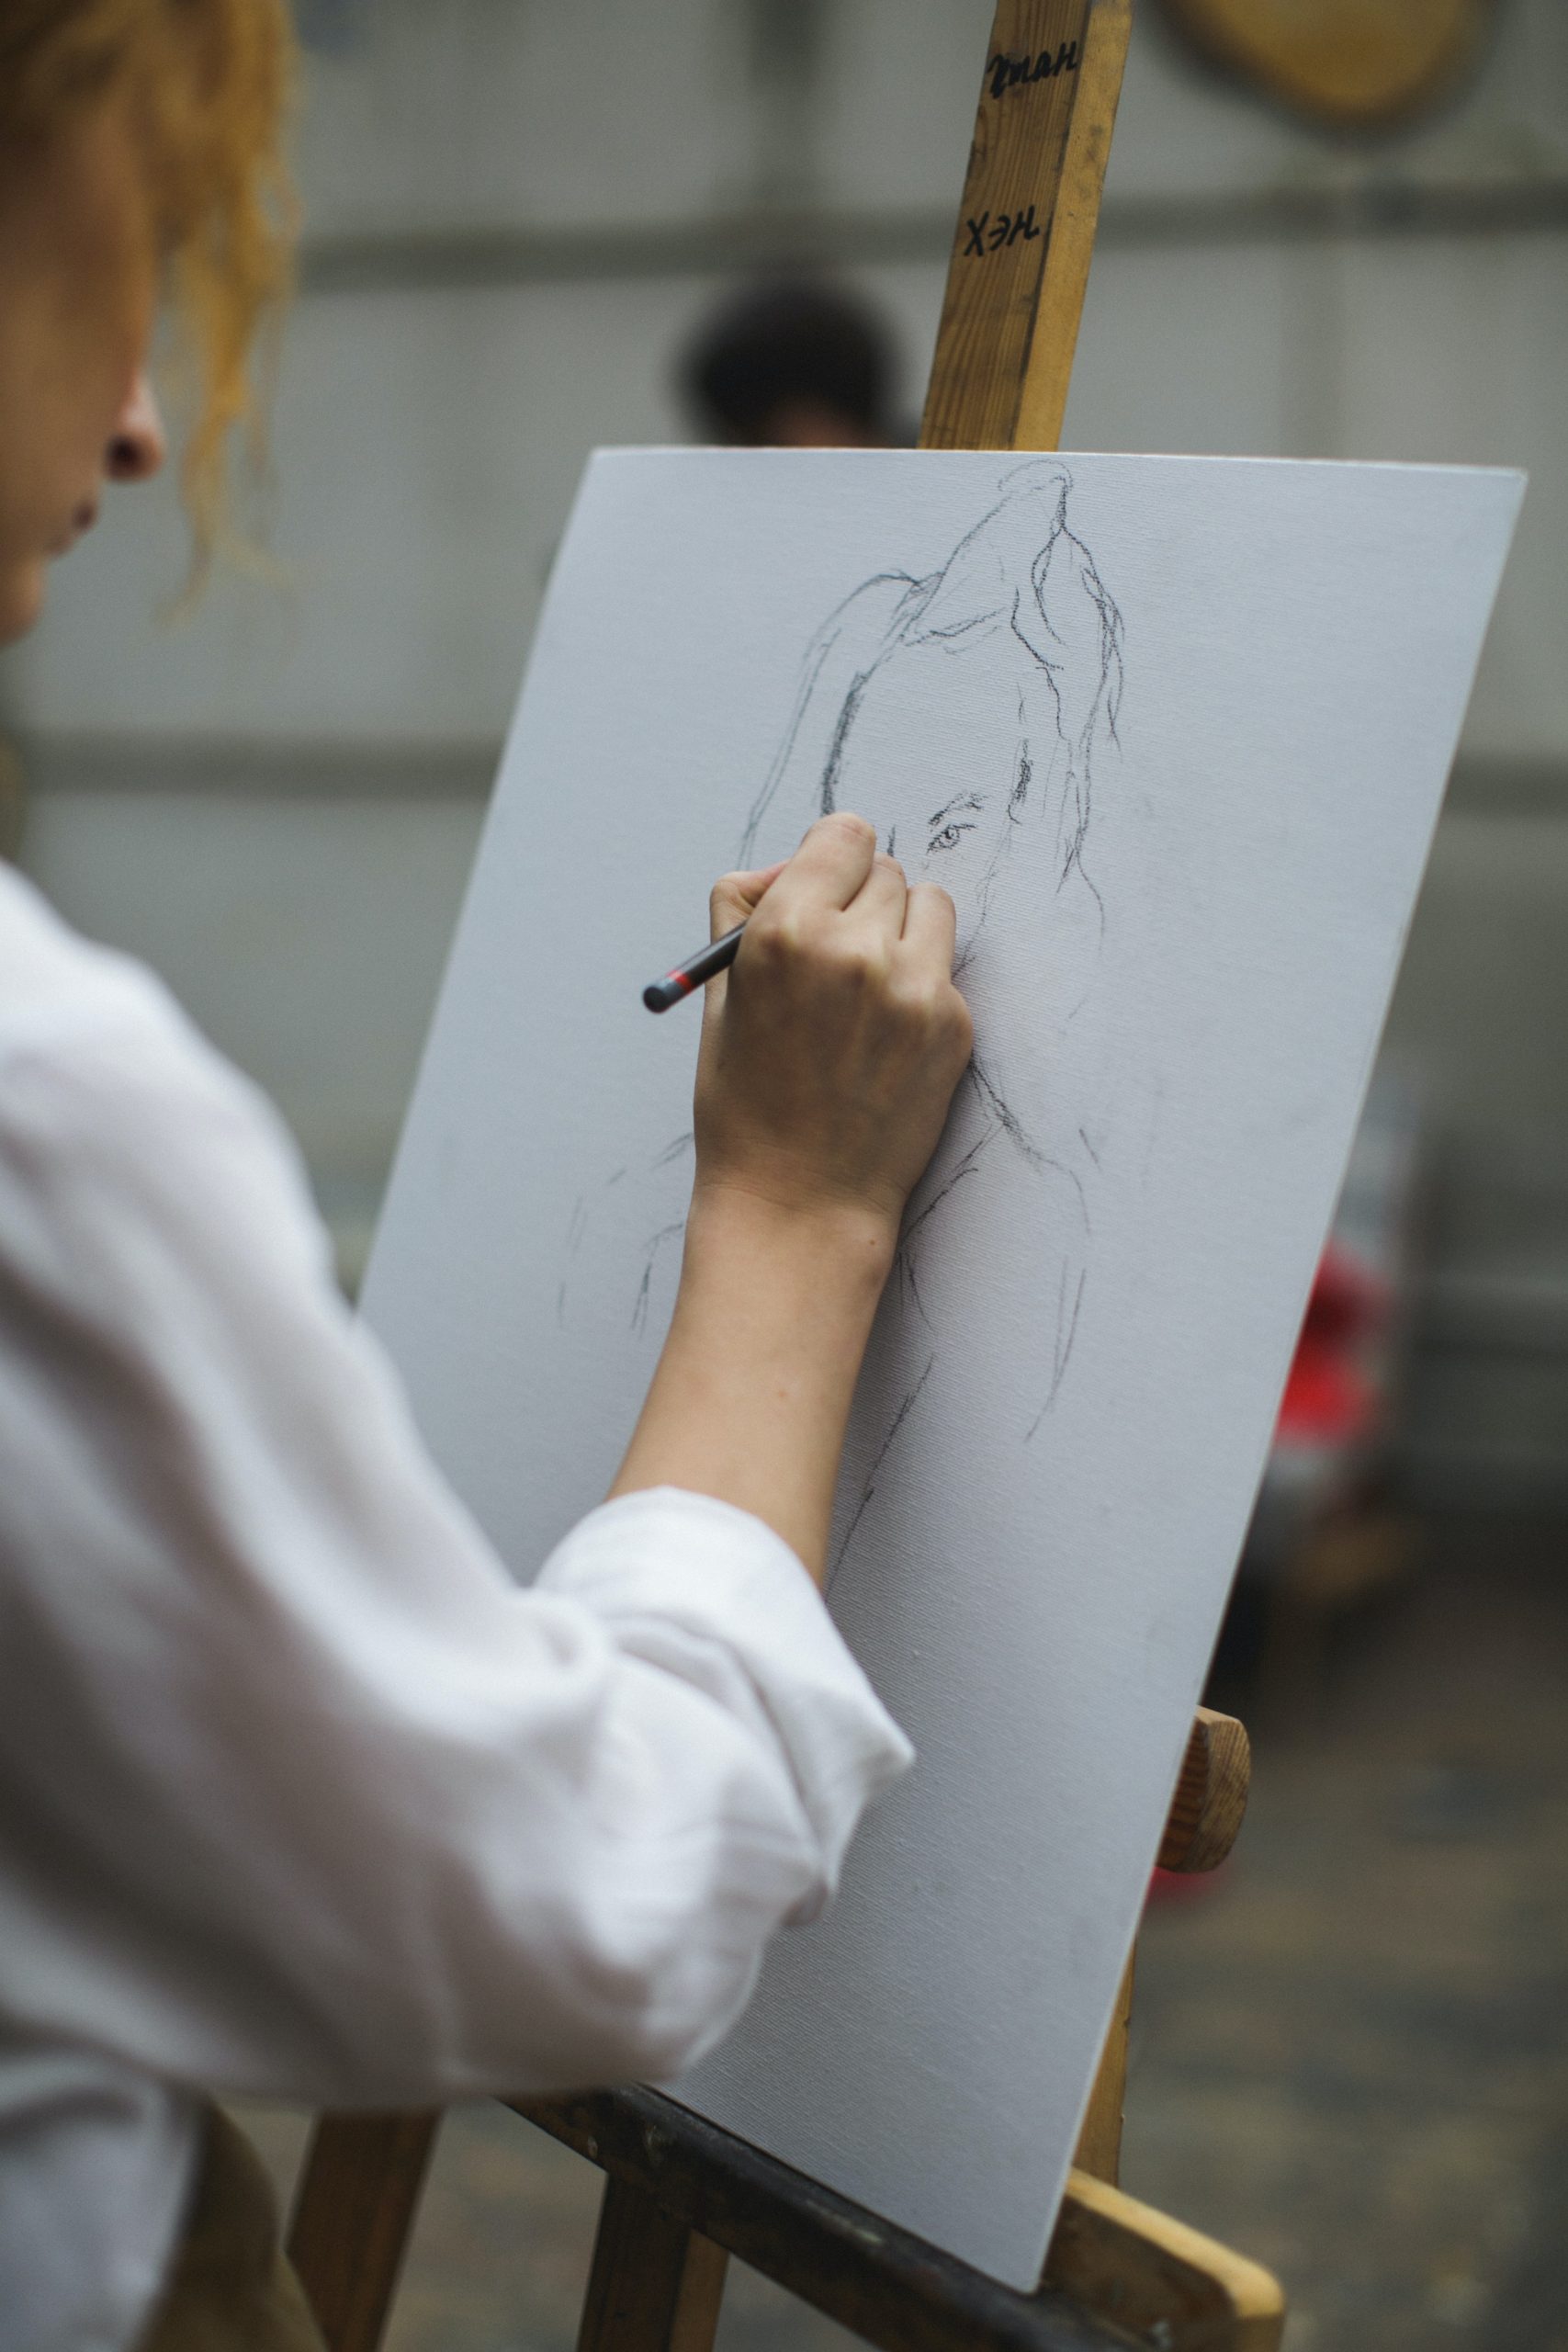 A woman draws a portrait of another person in fine detail.